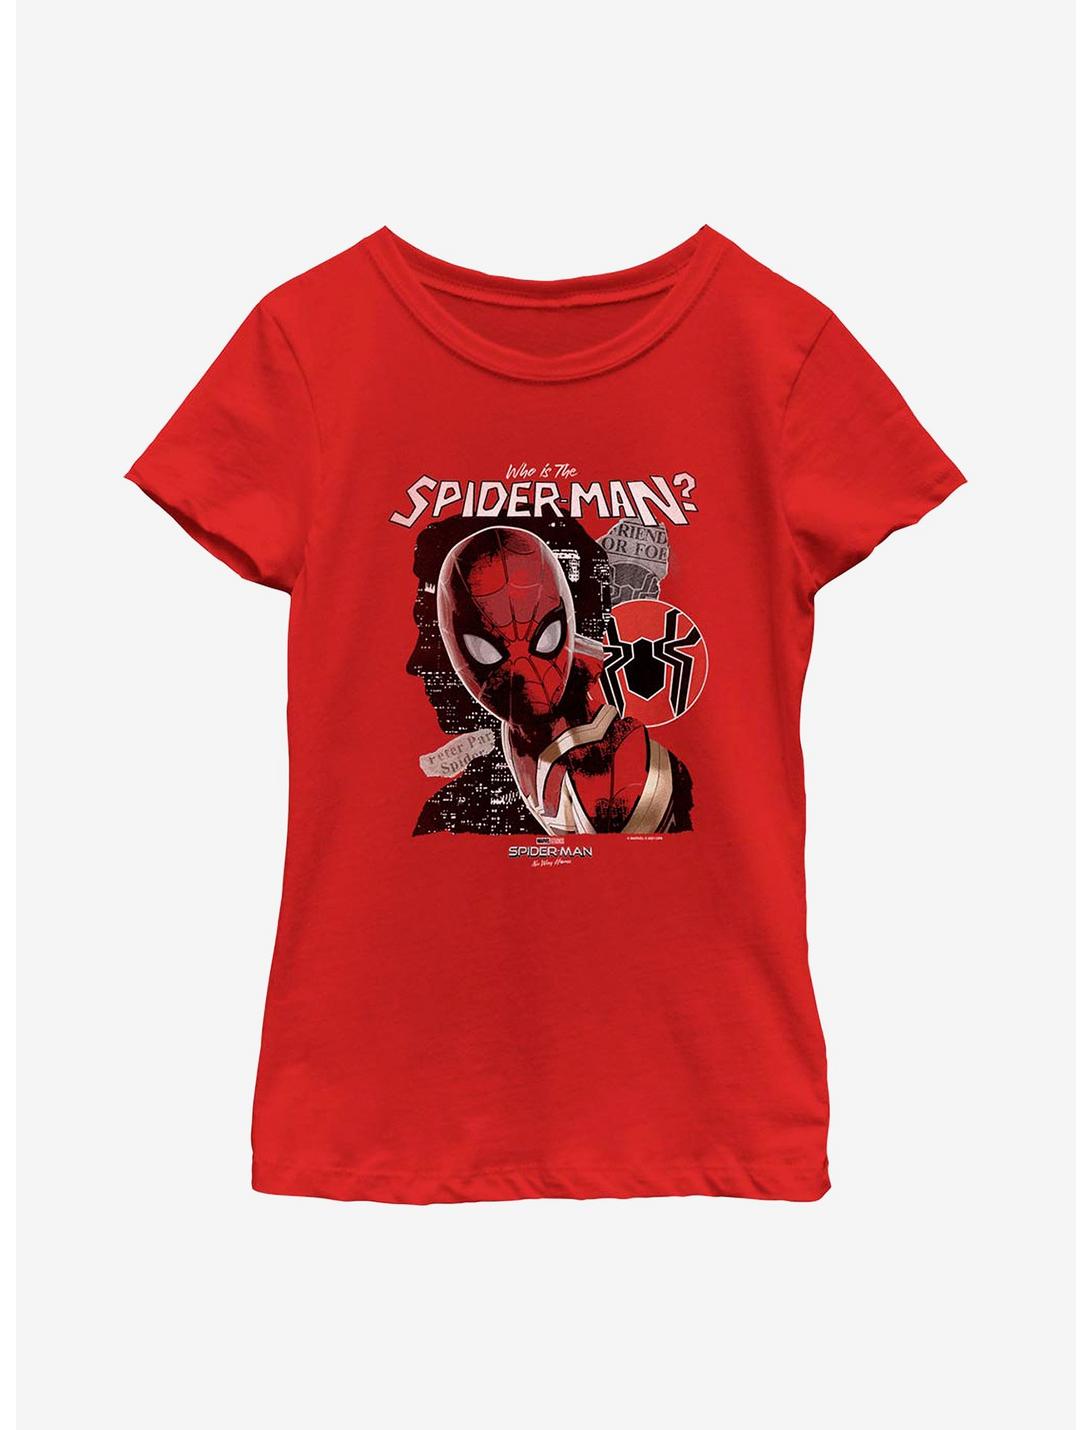 Marvel Spider-Man: No Way Home Unmasked Man Youth Girls T-Shirt, RED, hi-res